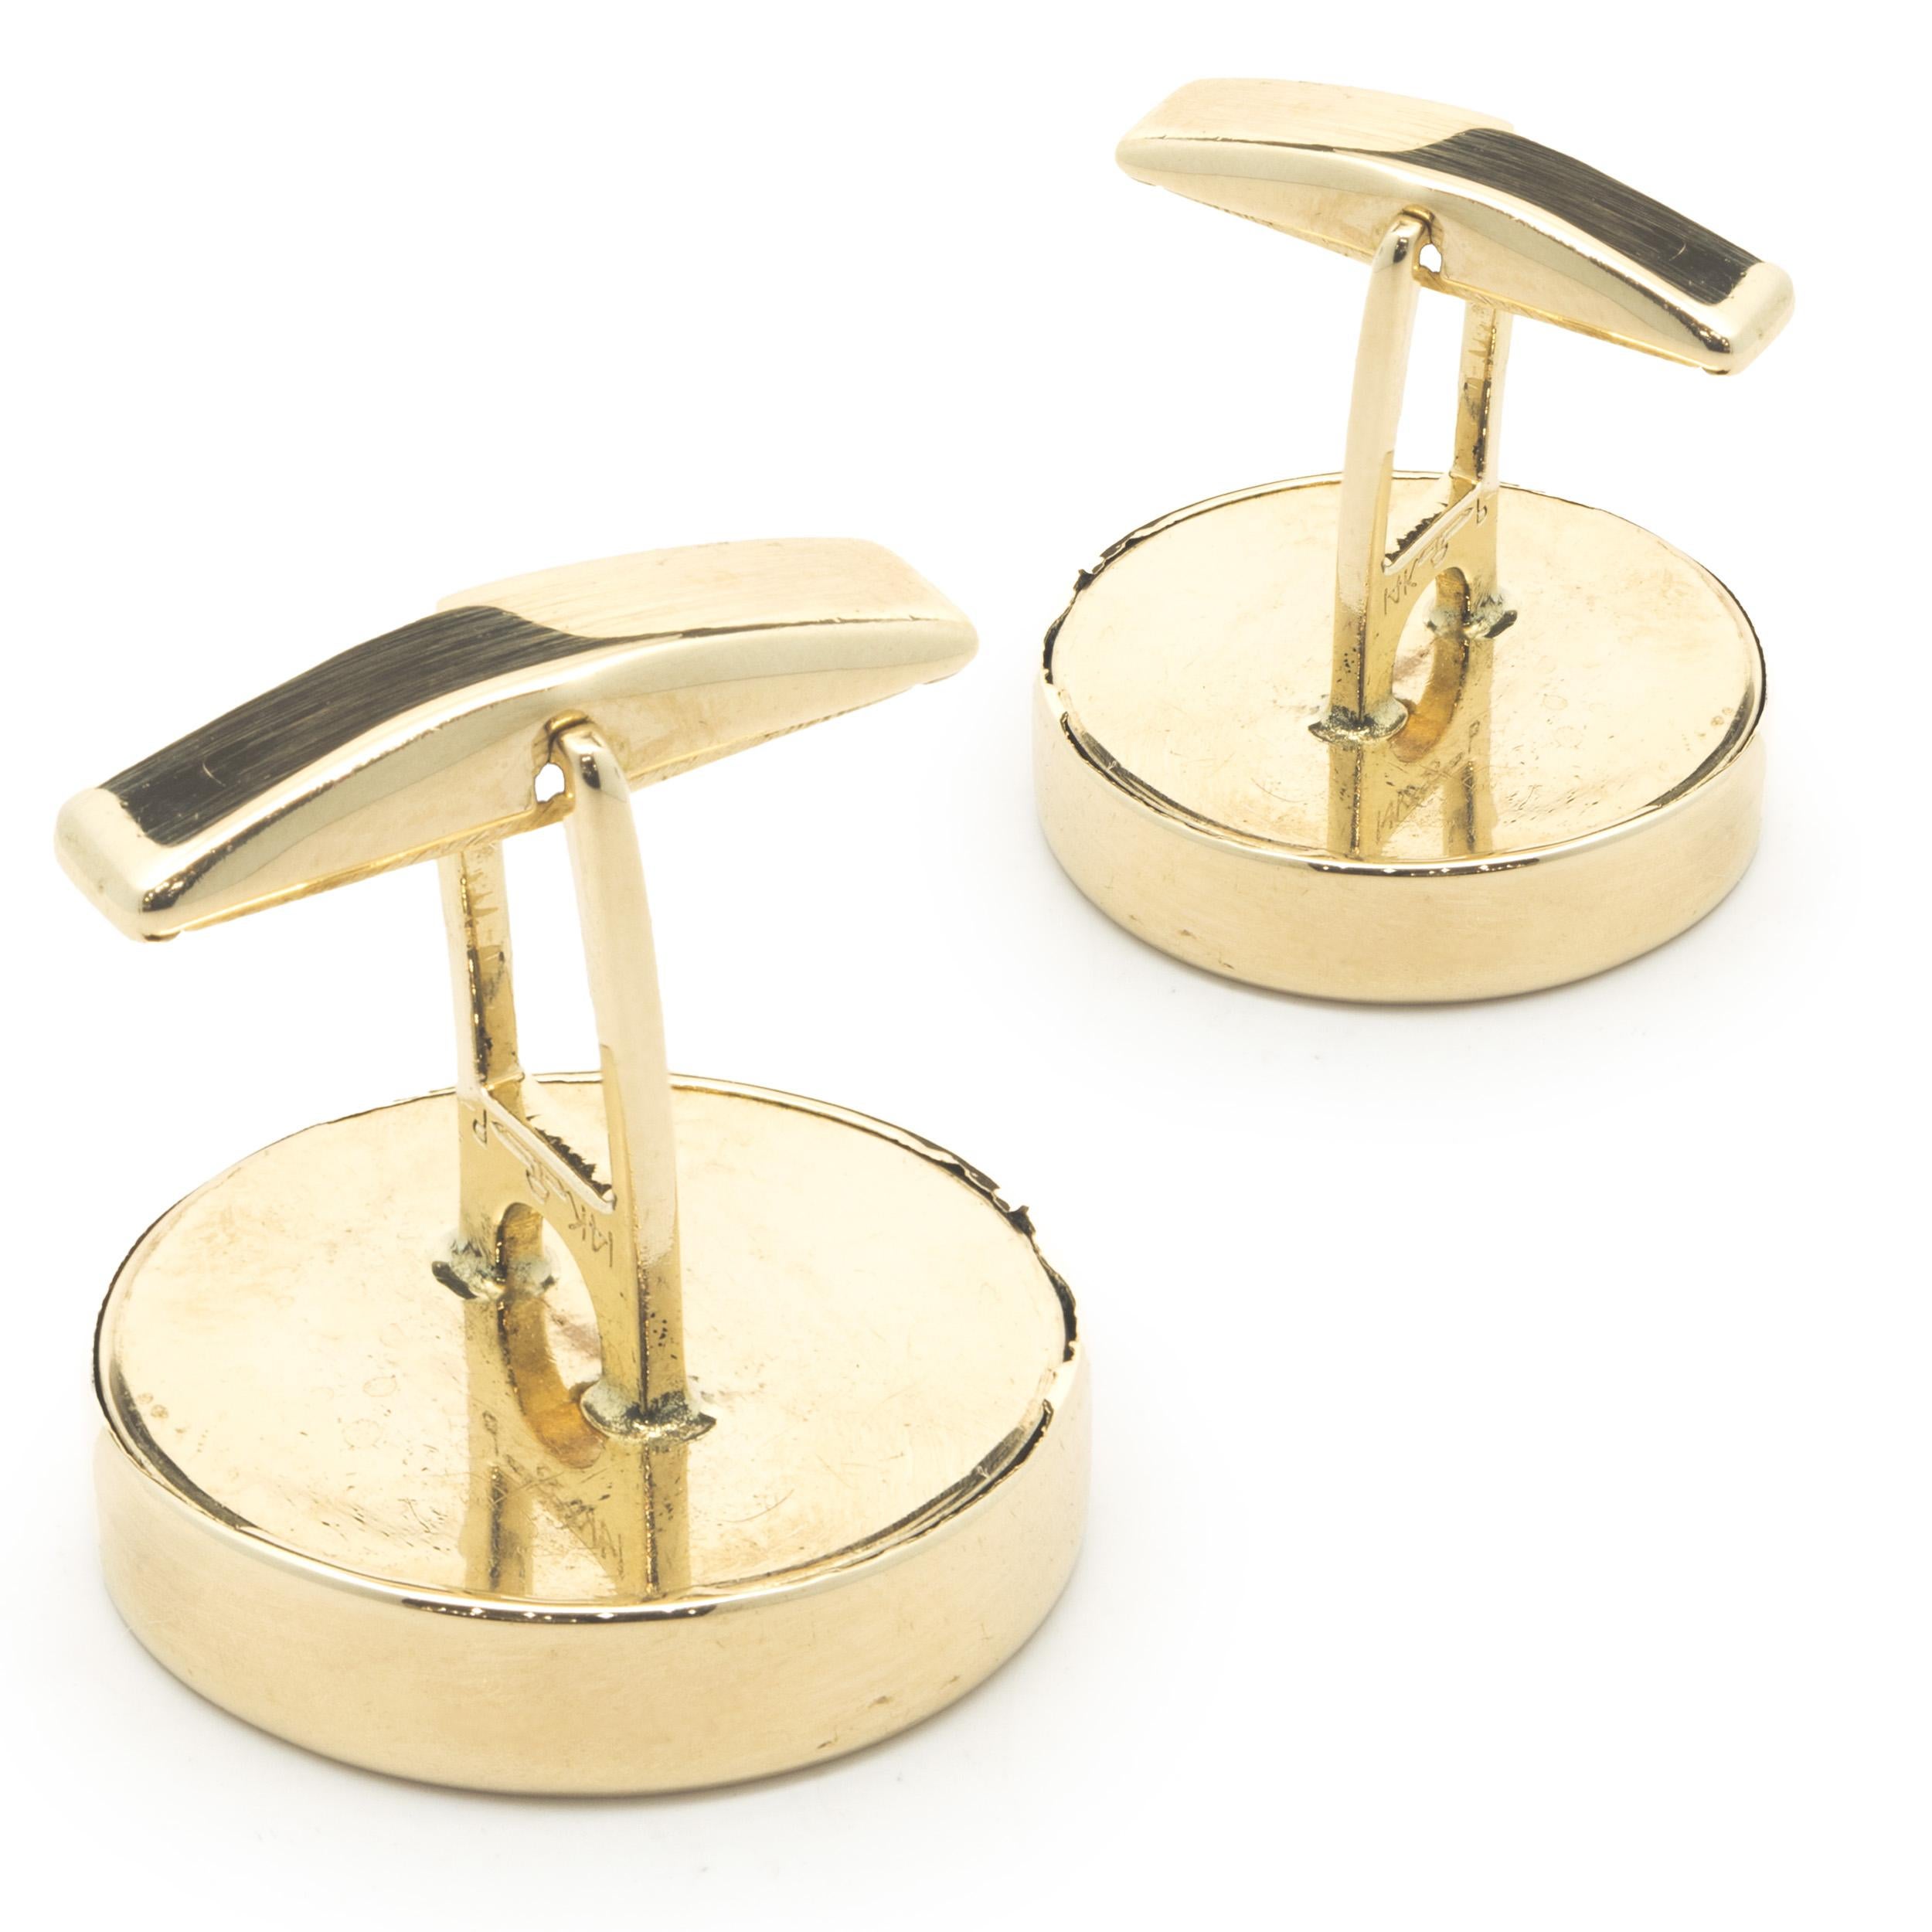 Material: 14K yellow gold
Dimensions: cufflinks measure 21mm
Weight: 18.24 grams